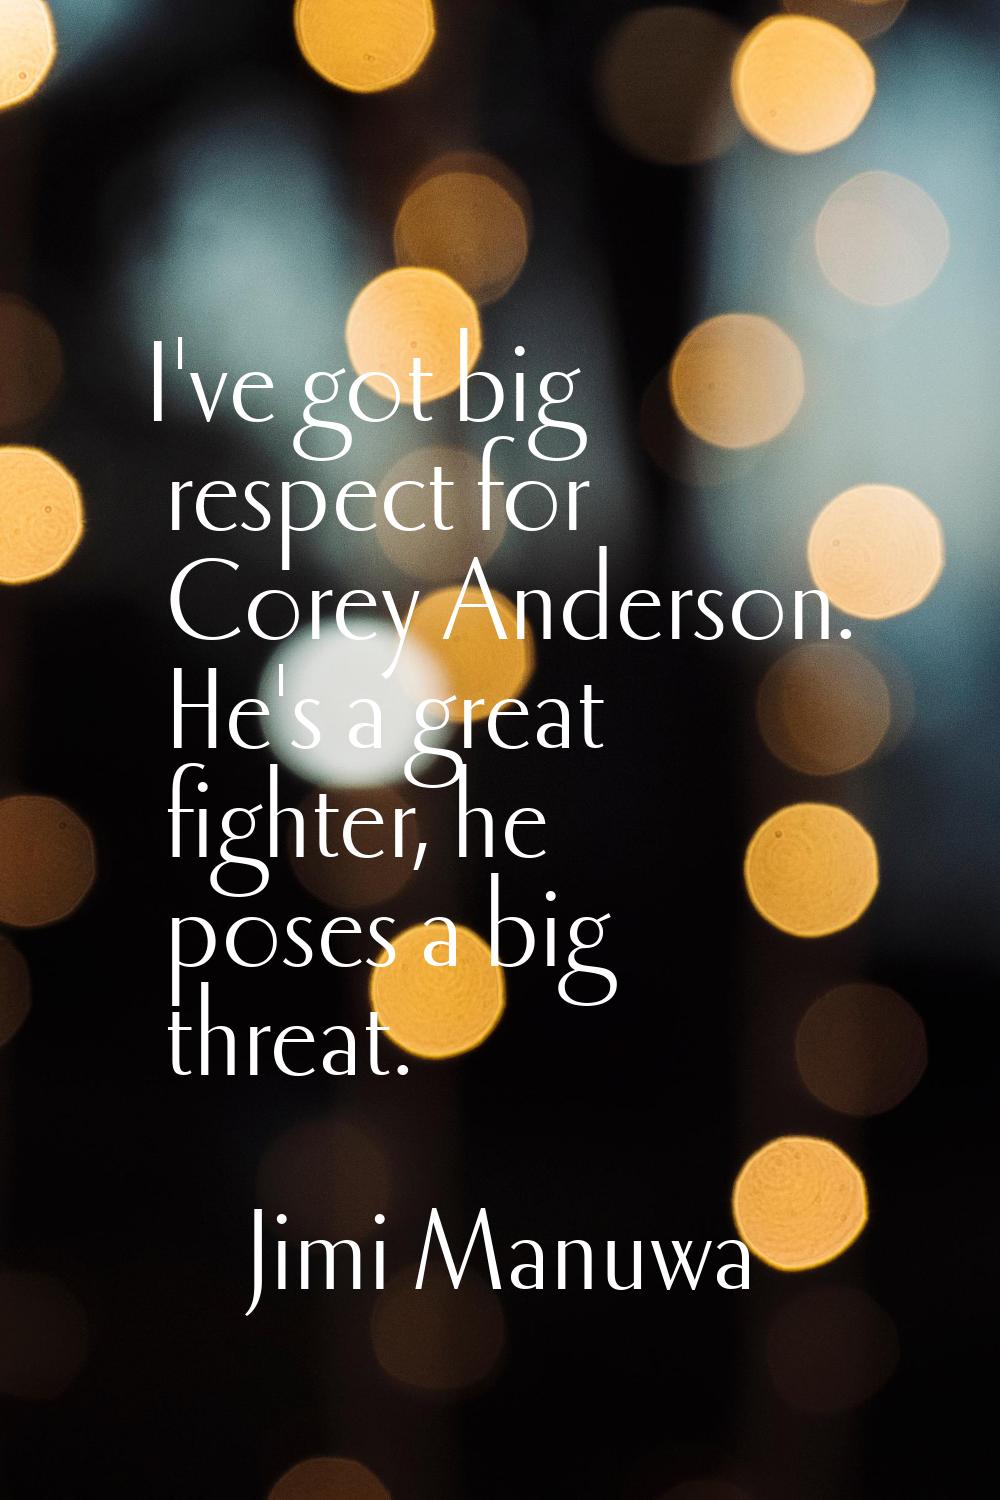 I've got big respect for Corey Anderson. He's a great fighter, he poses a big threat.